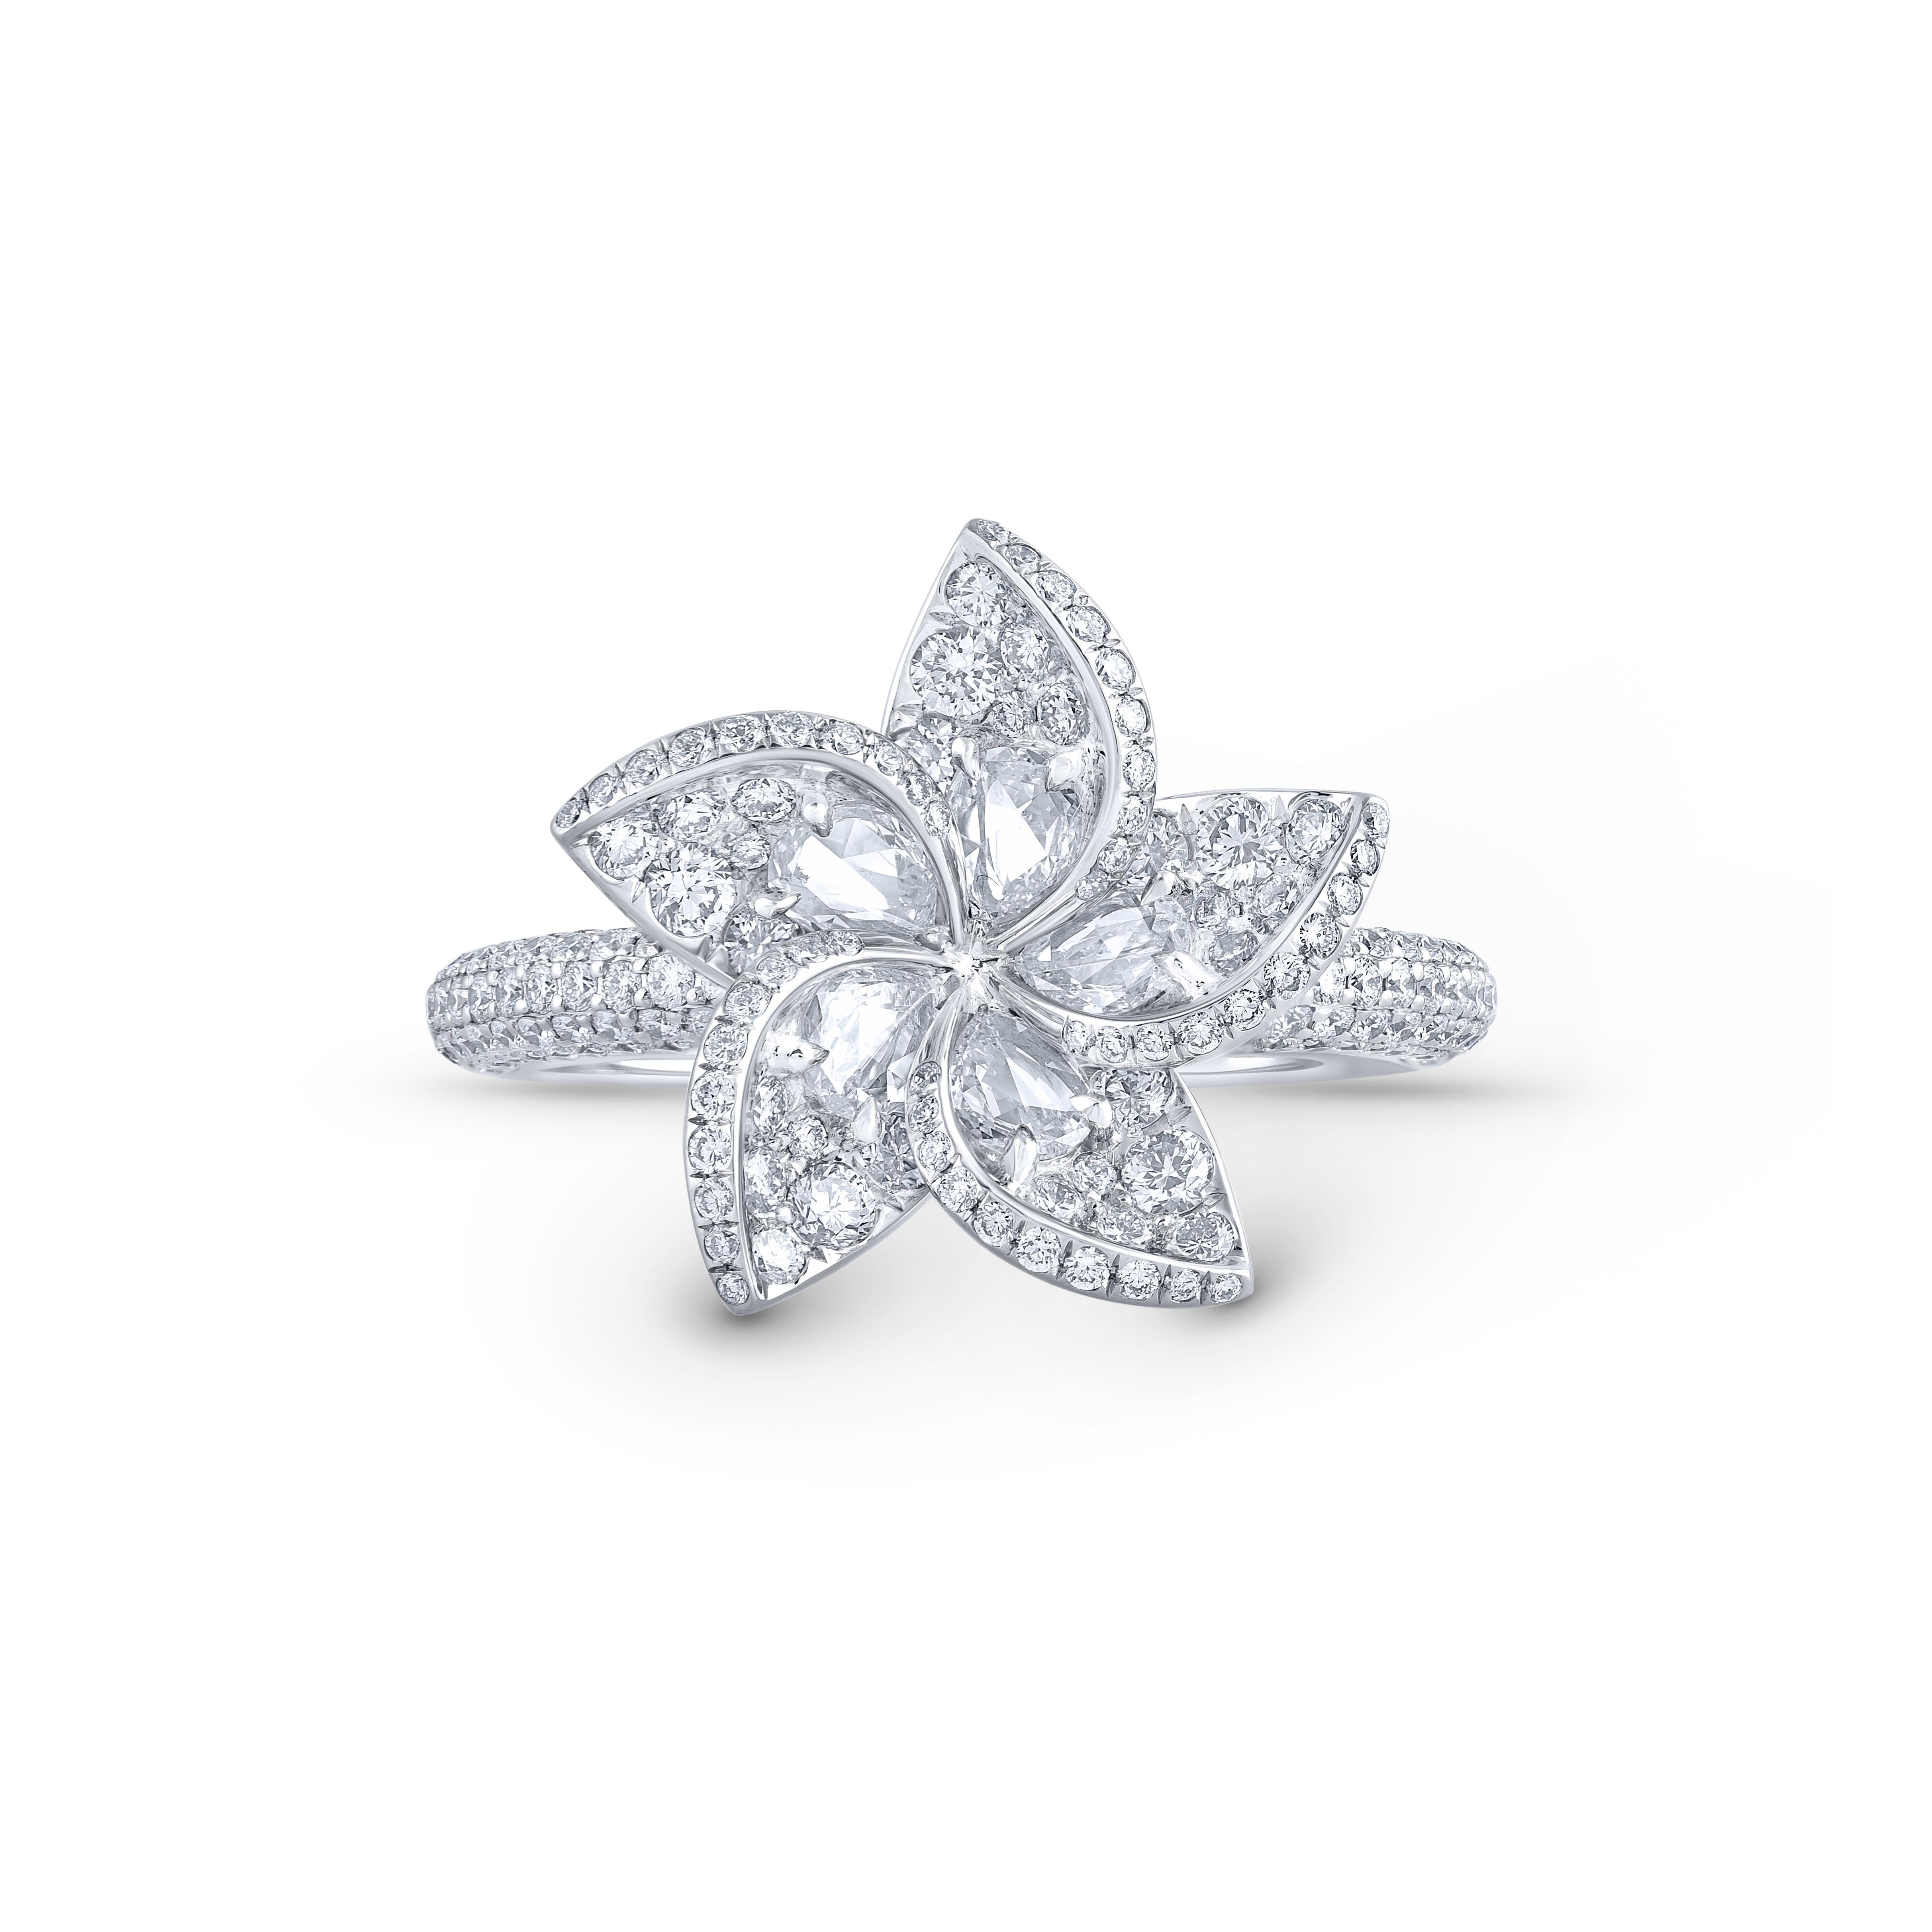 This beautiful floral ring features shimmering pear rose cut diamonds and brilliant round in pave setting resembling petals, with a diamond studded shank crafted in 18 karat white gold.

The ring is studded with 226 brilliant cut and 5 rose cut pear